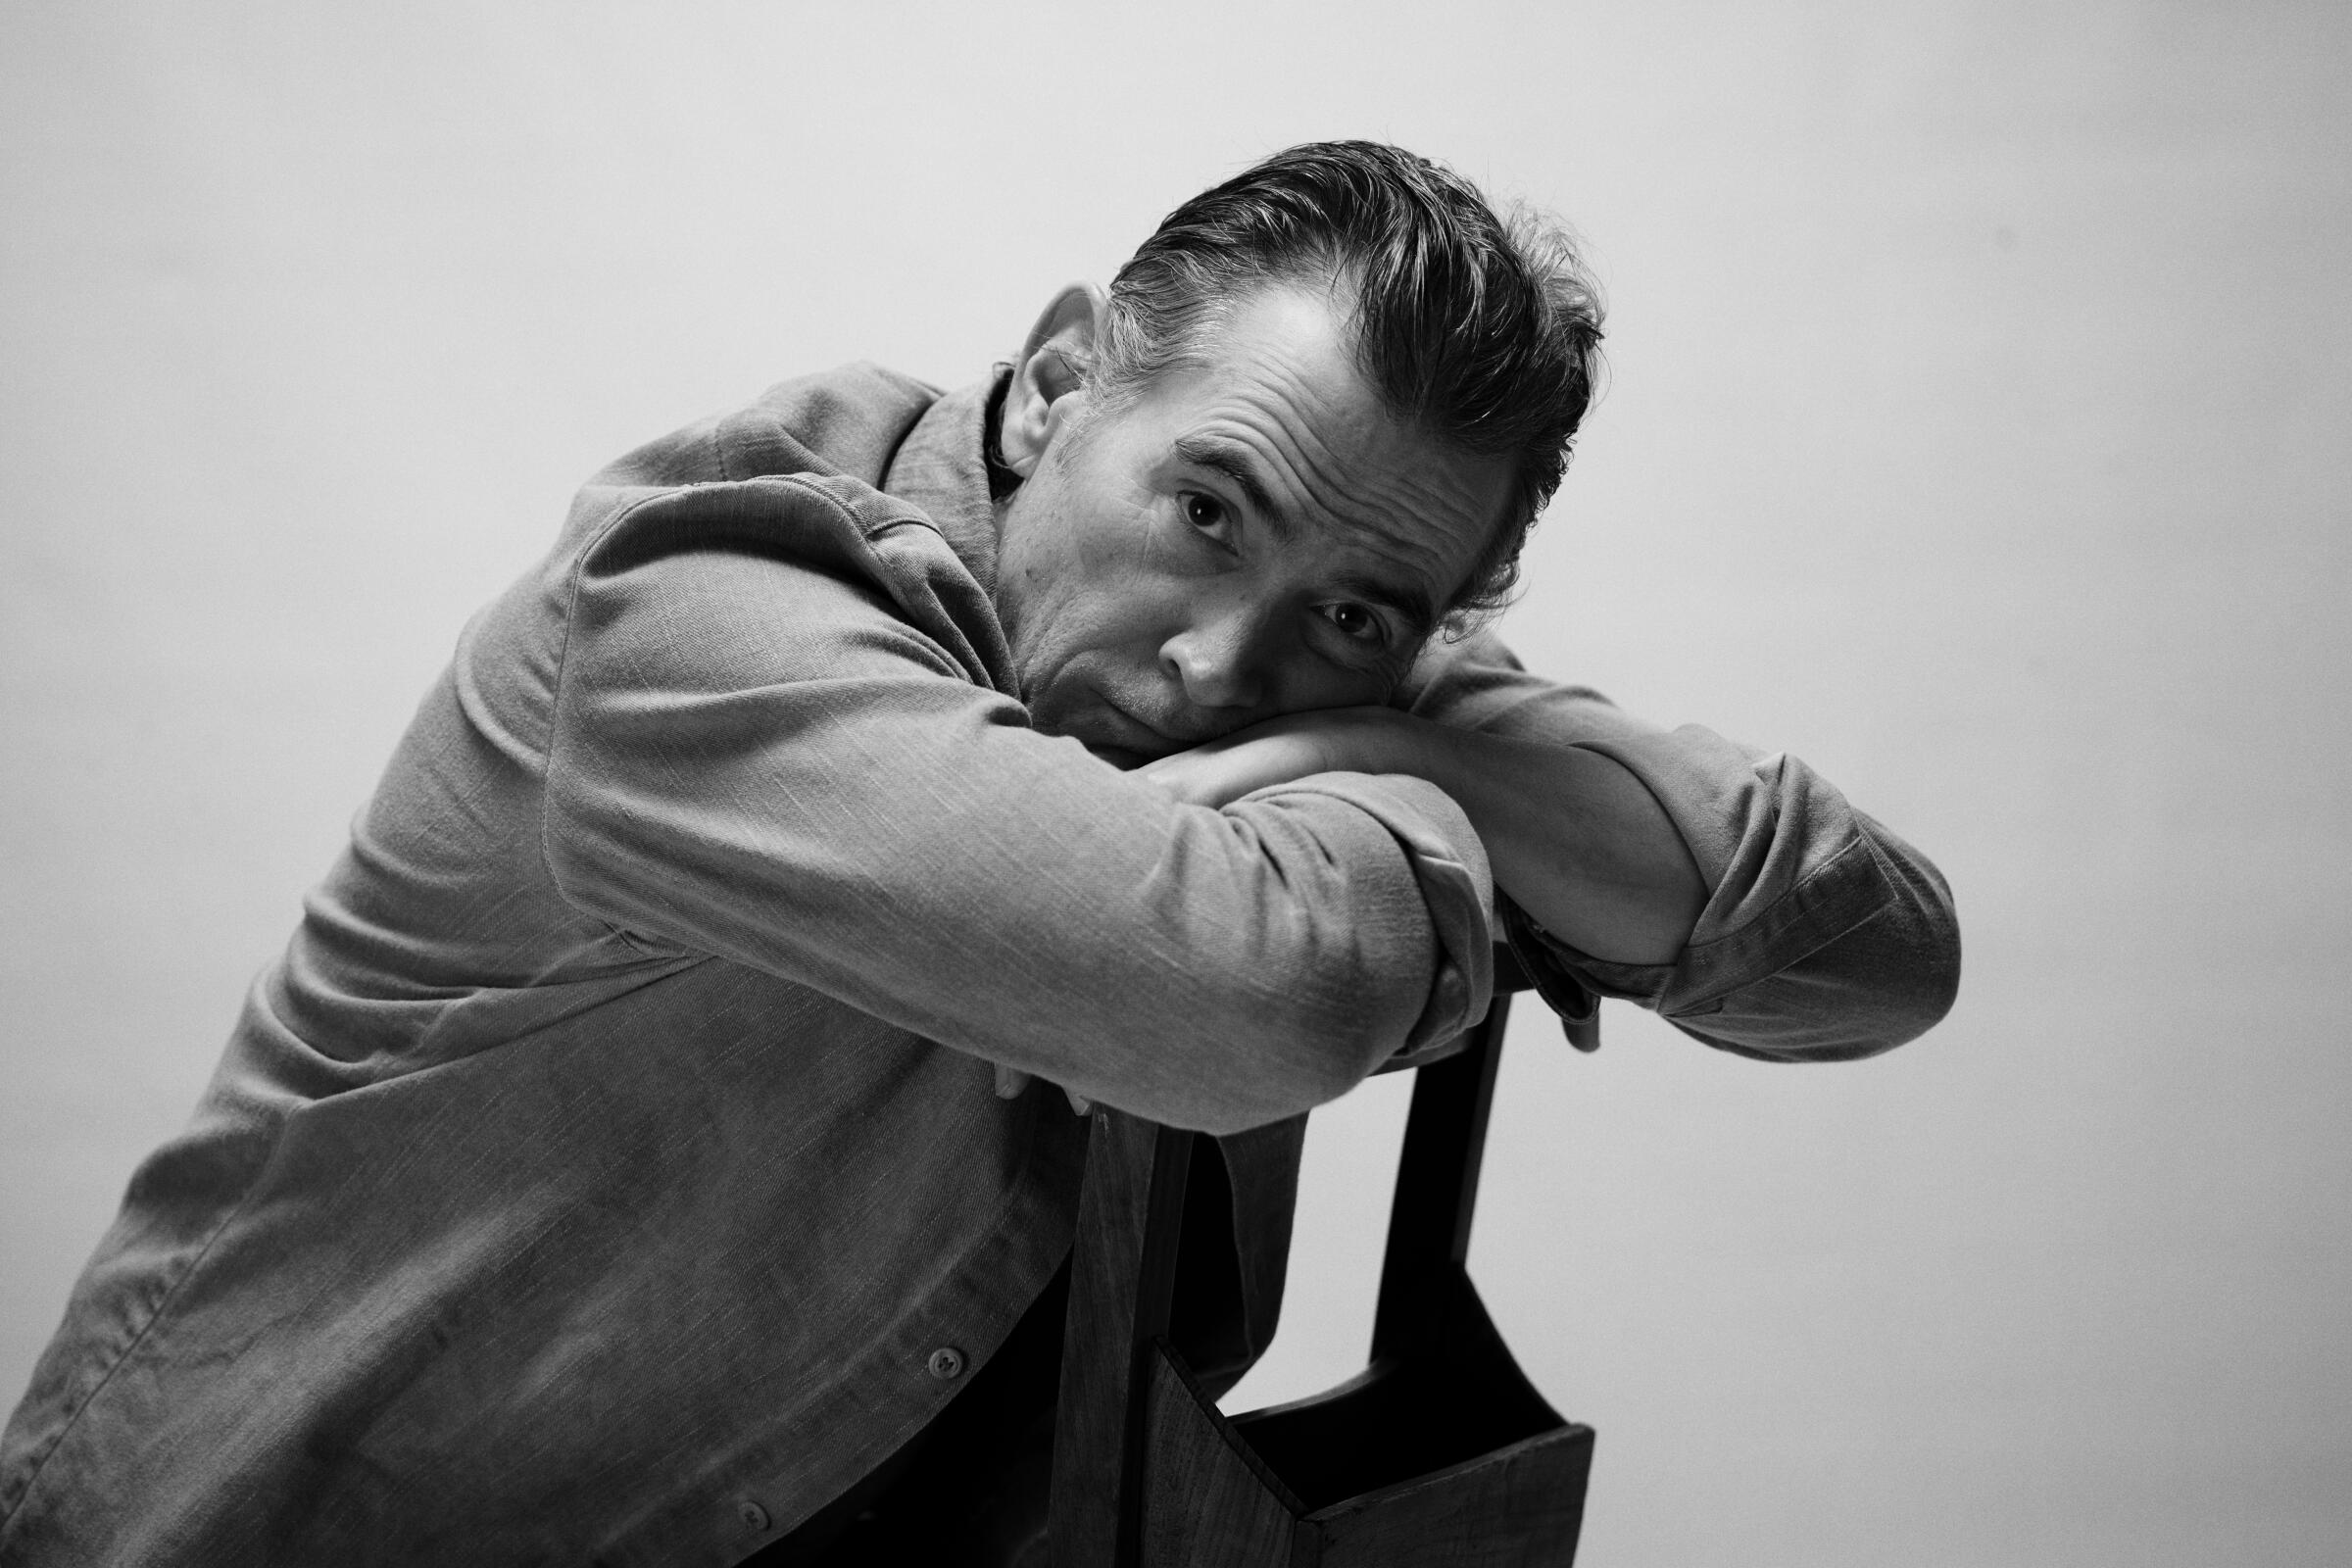 Billy Crudup sits backward in a chair, resting his head and arms on its back, in a black-and-white portrait.